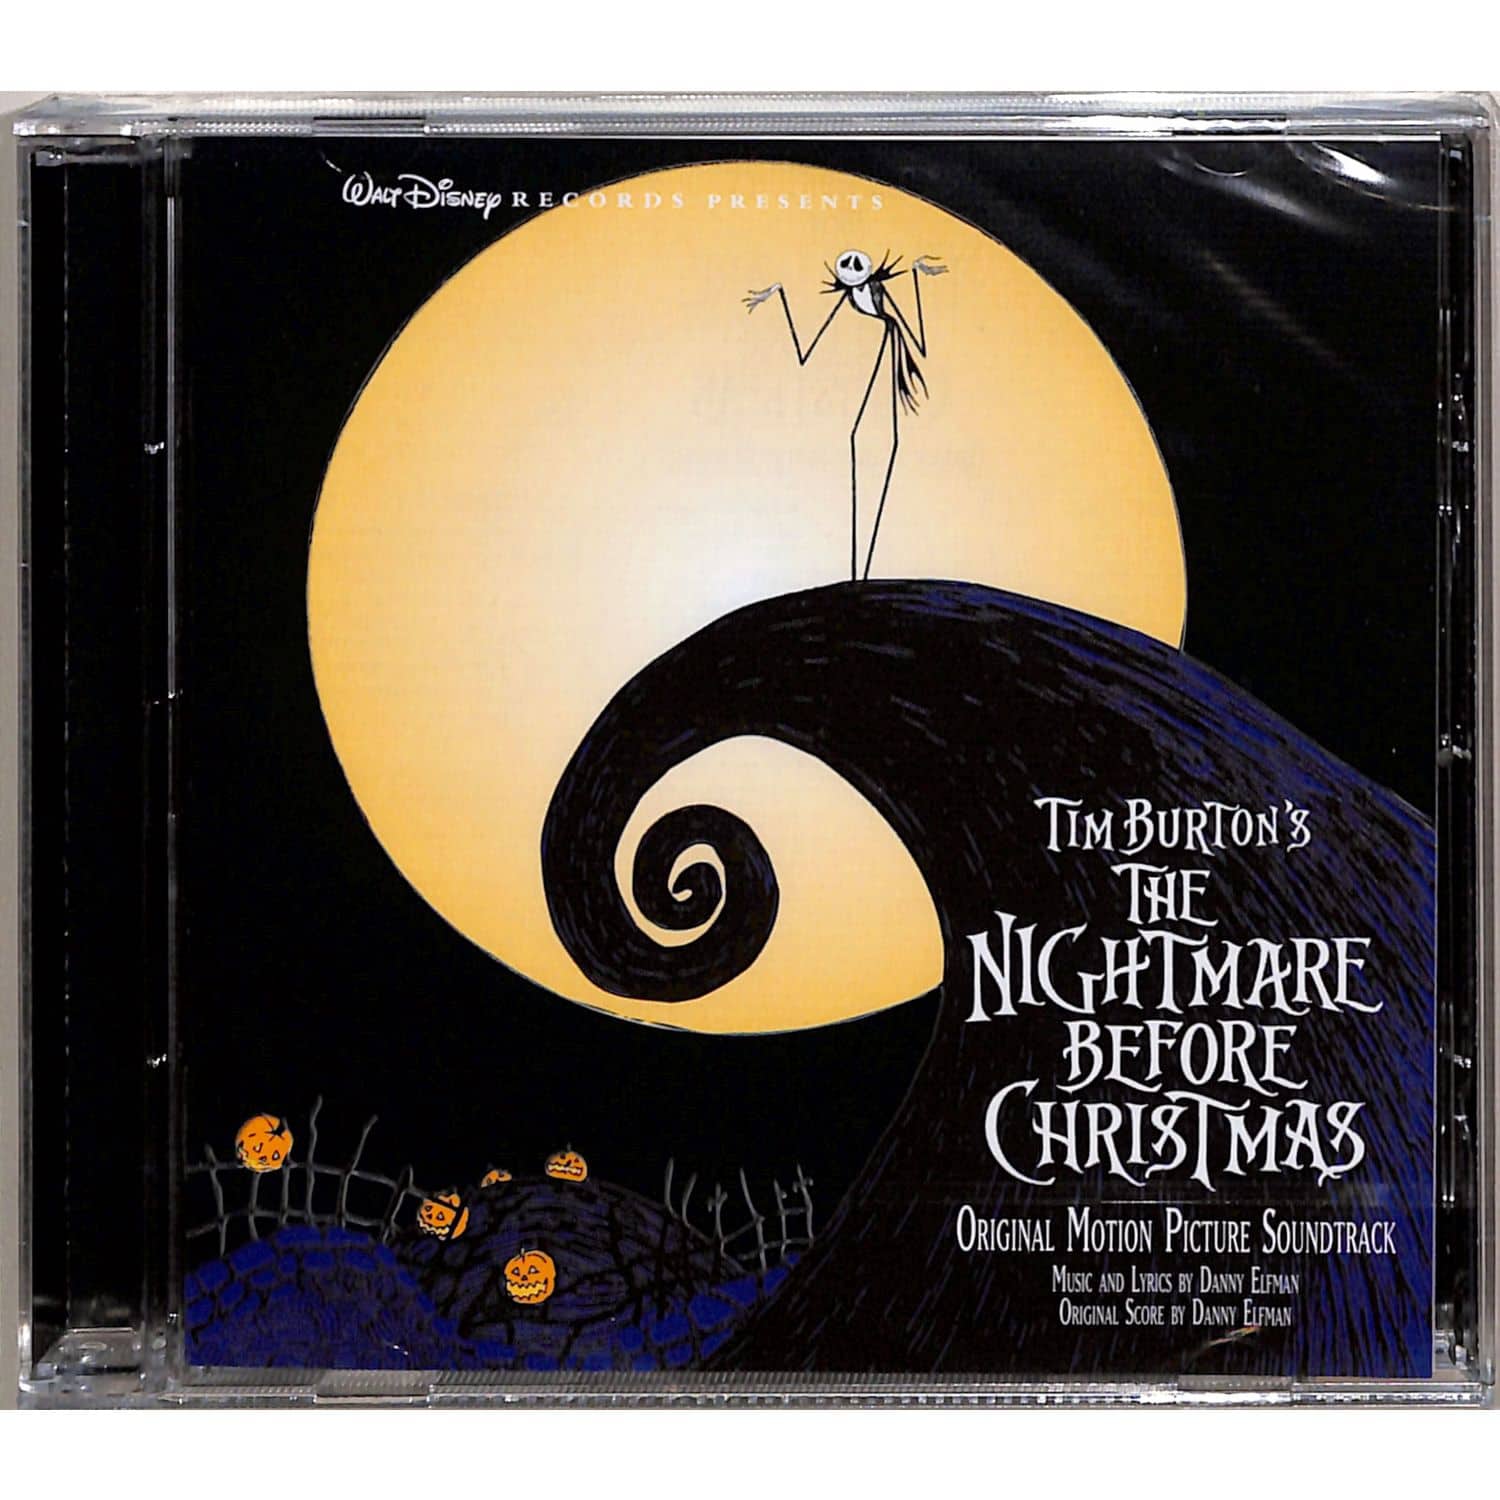 DANNY OST/ELFMAN - THE NIGHTMARE BEFORE CHRISTMAS 